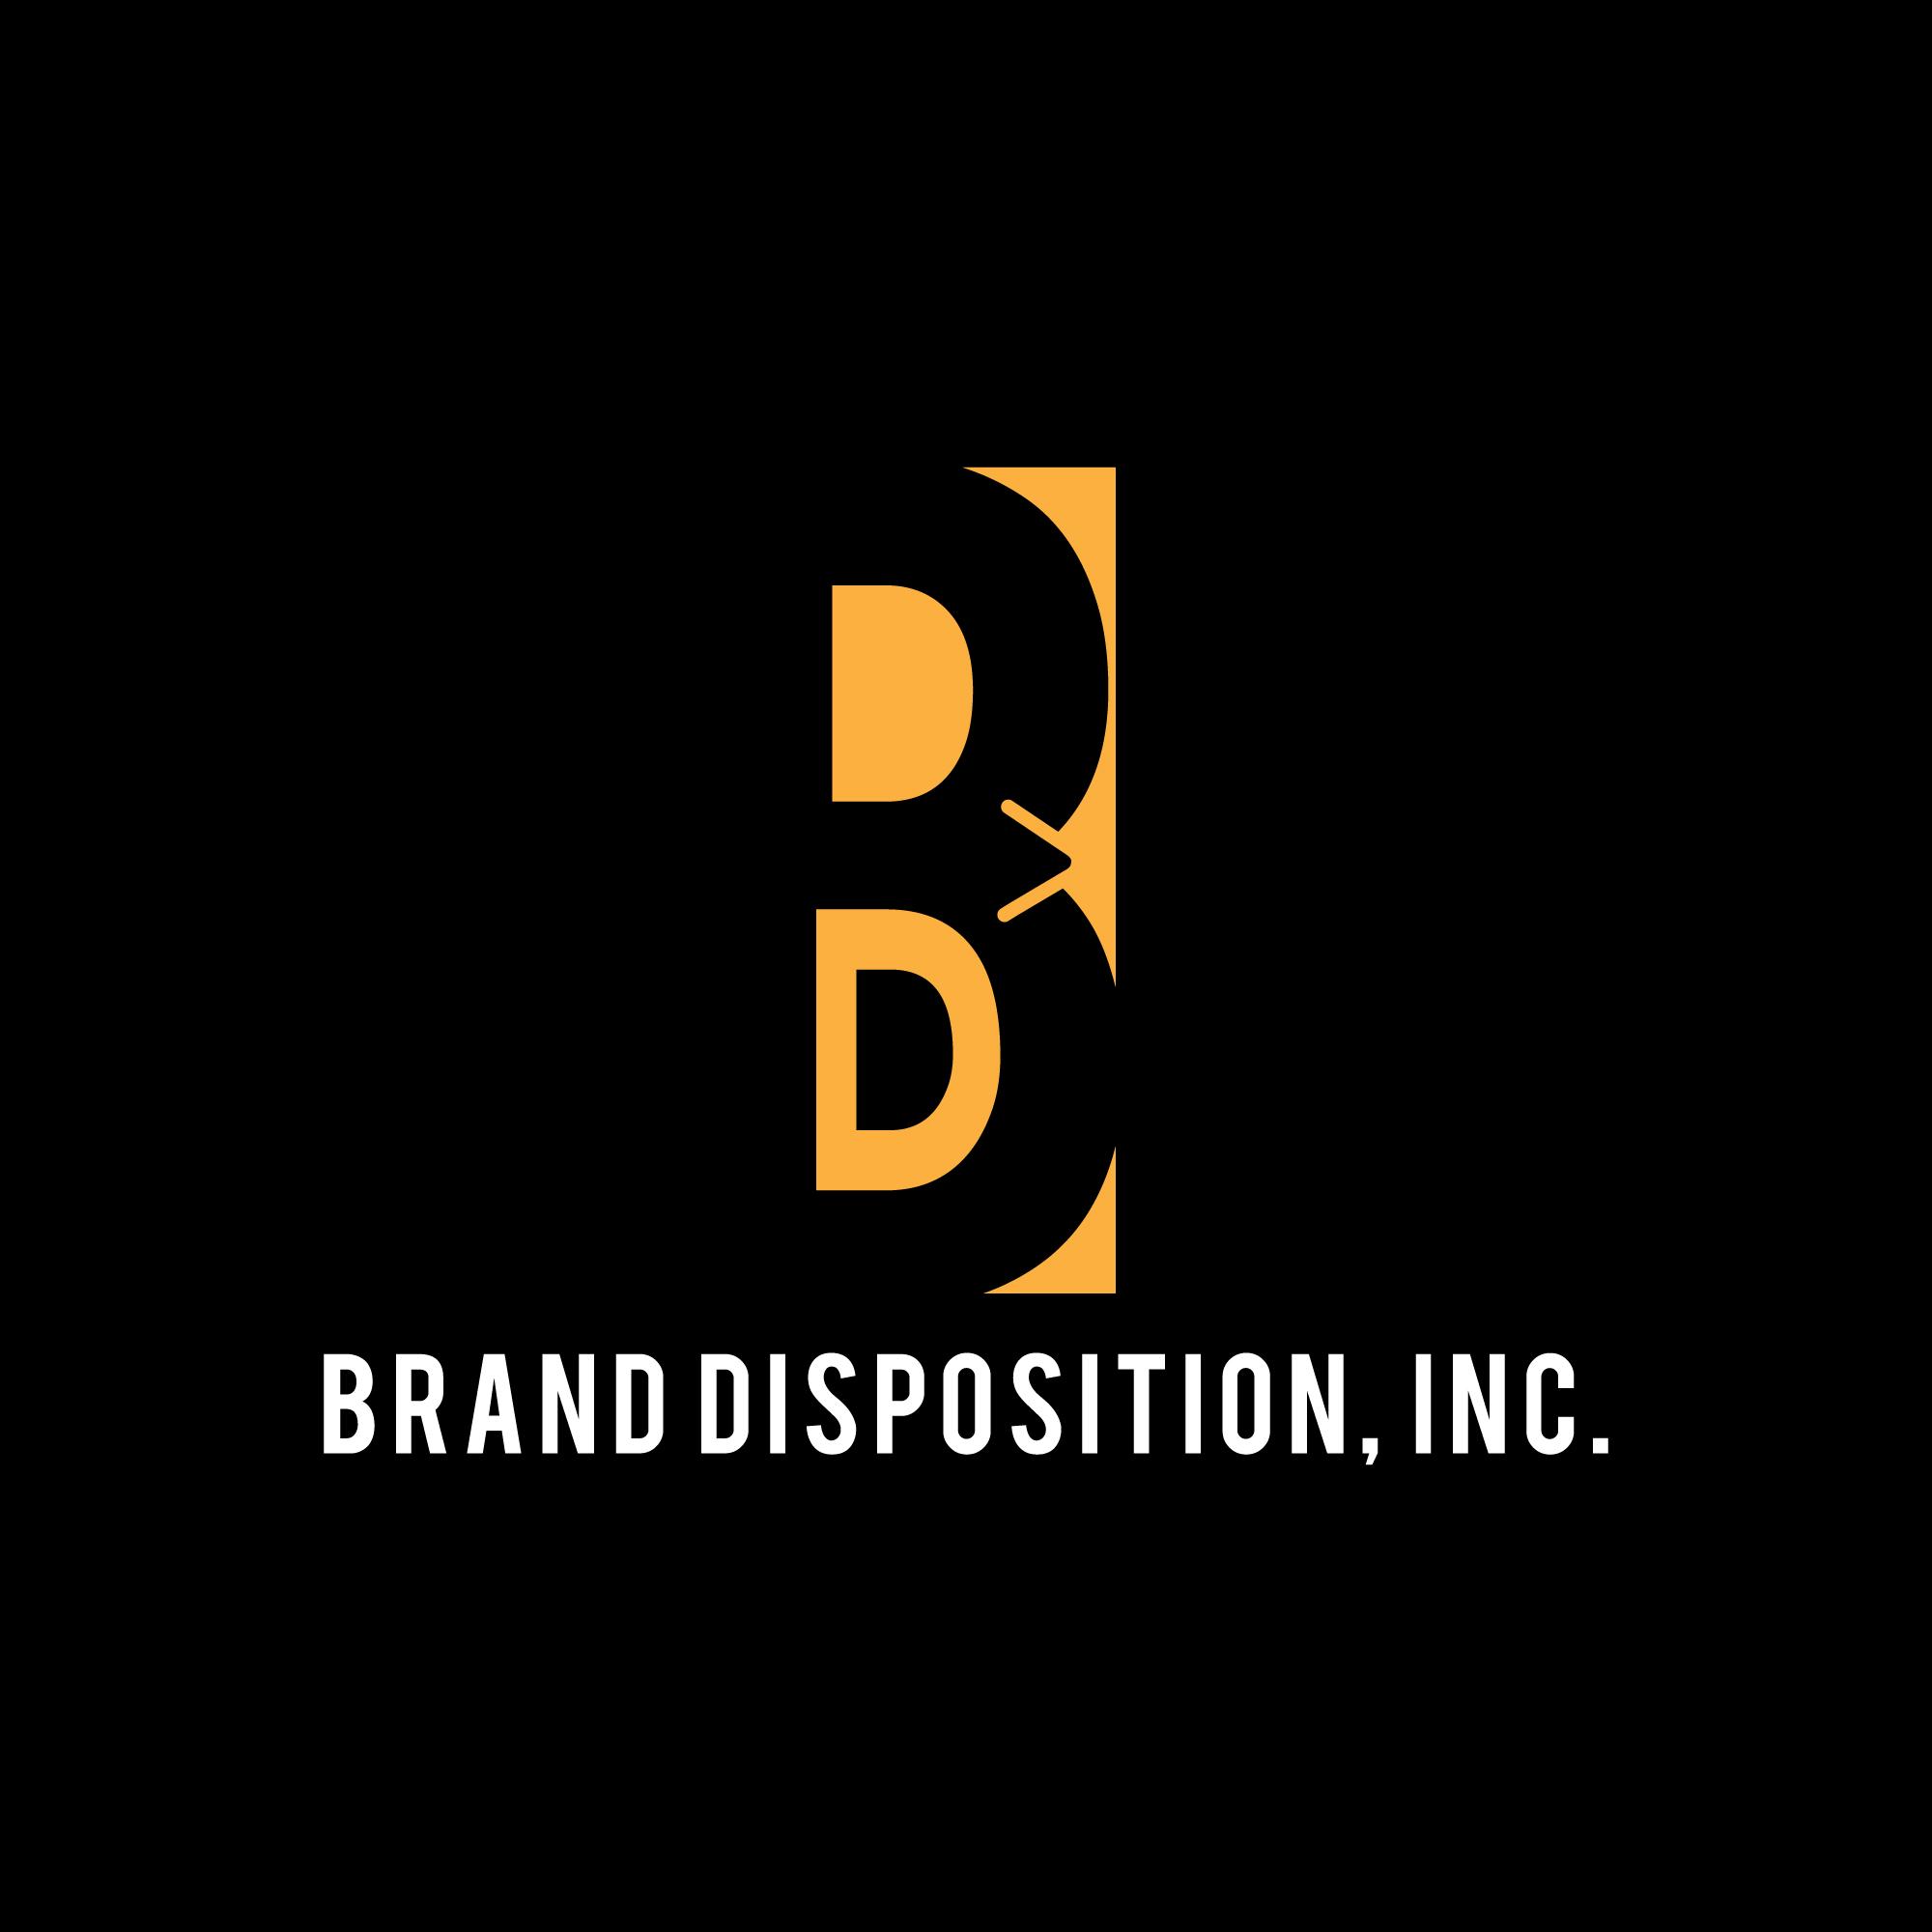 Brand Disposition, Inc. (BDI) profile on Qualified.One